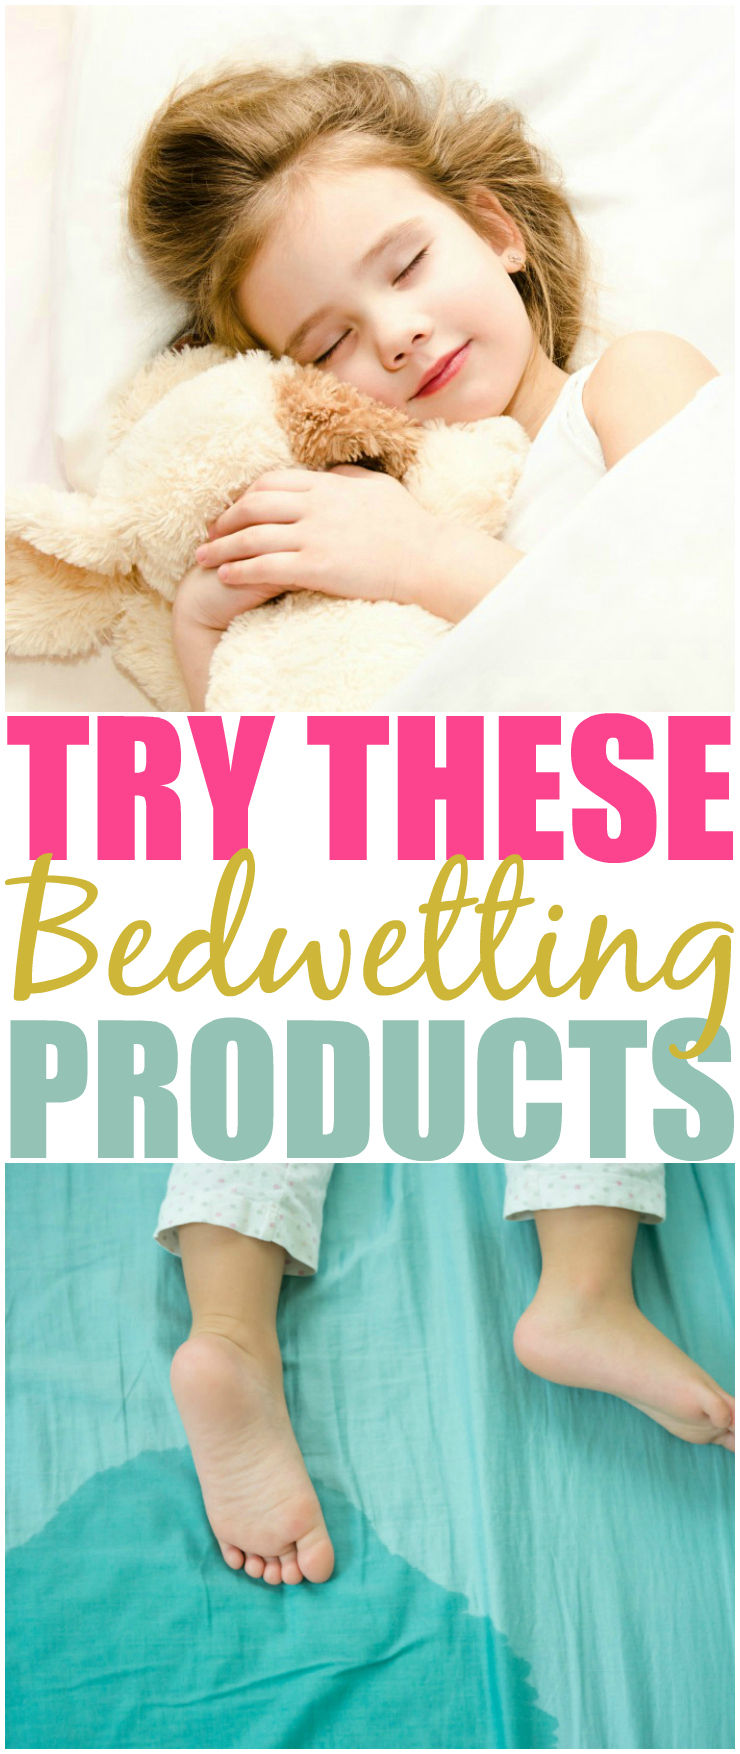 Does Your Child Have Nighttime Accidents 5 Bedwetting Products to Try